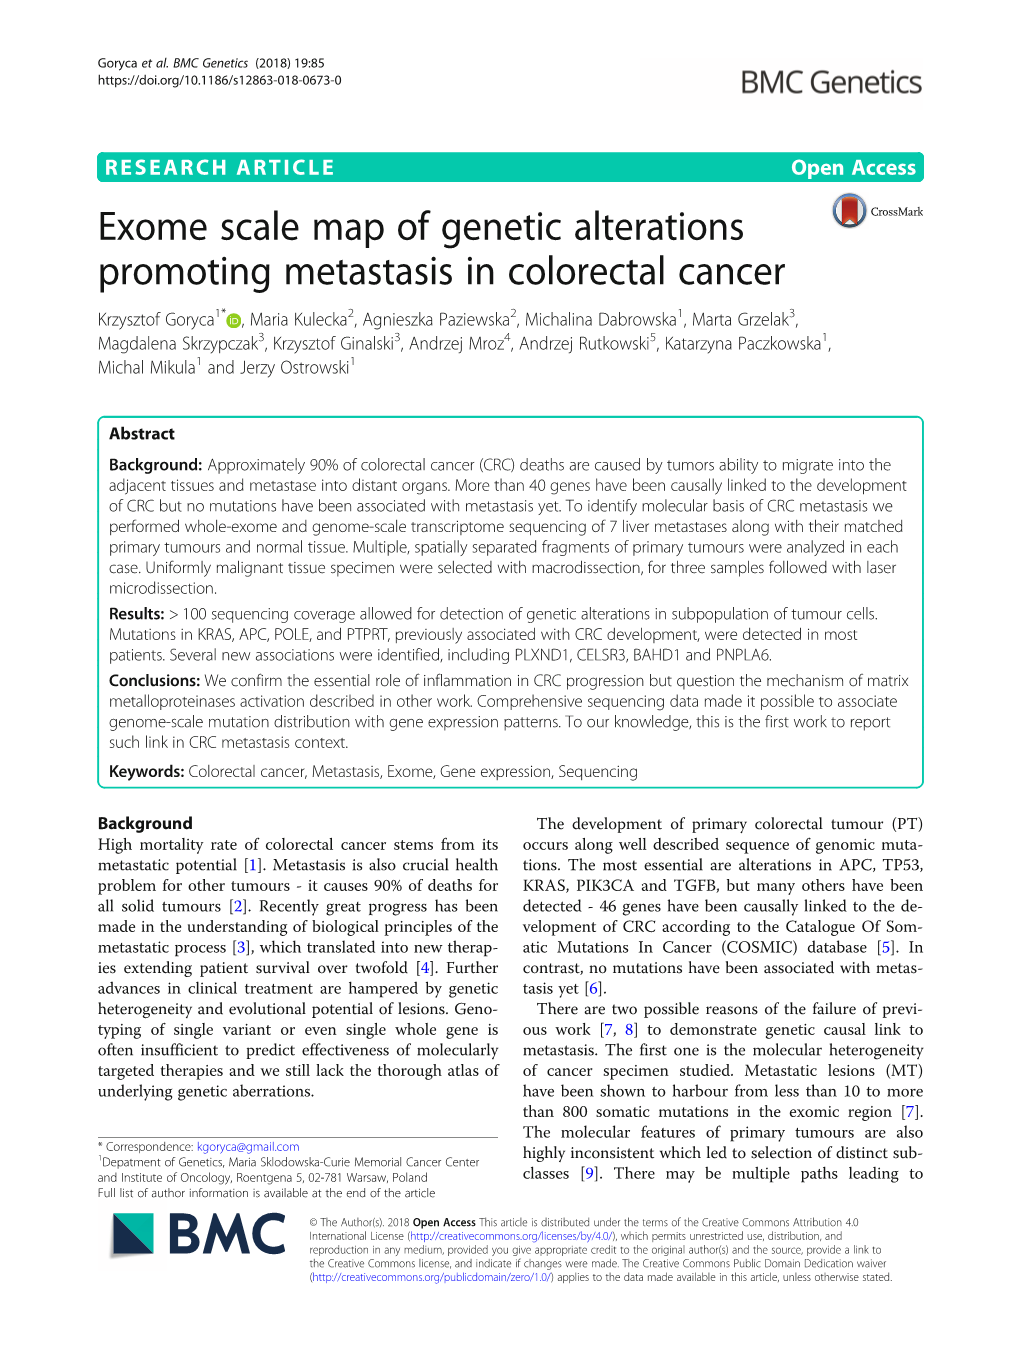 Exome Scale Map of Genetic Alterations Promoting Metastasis In